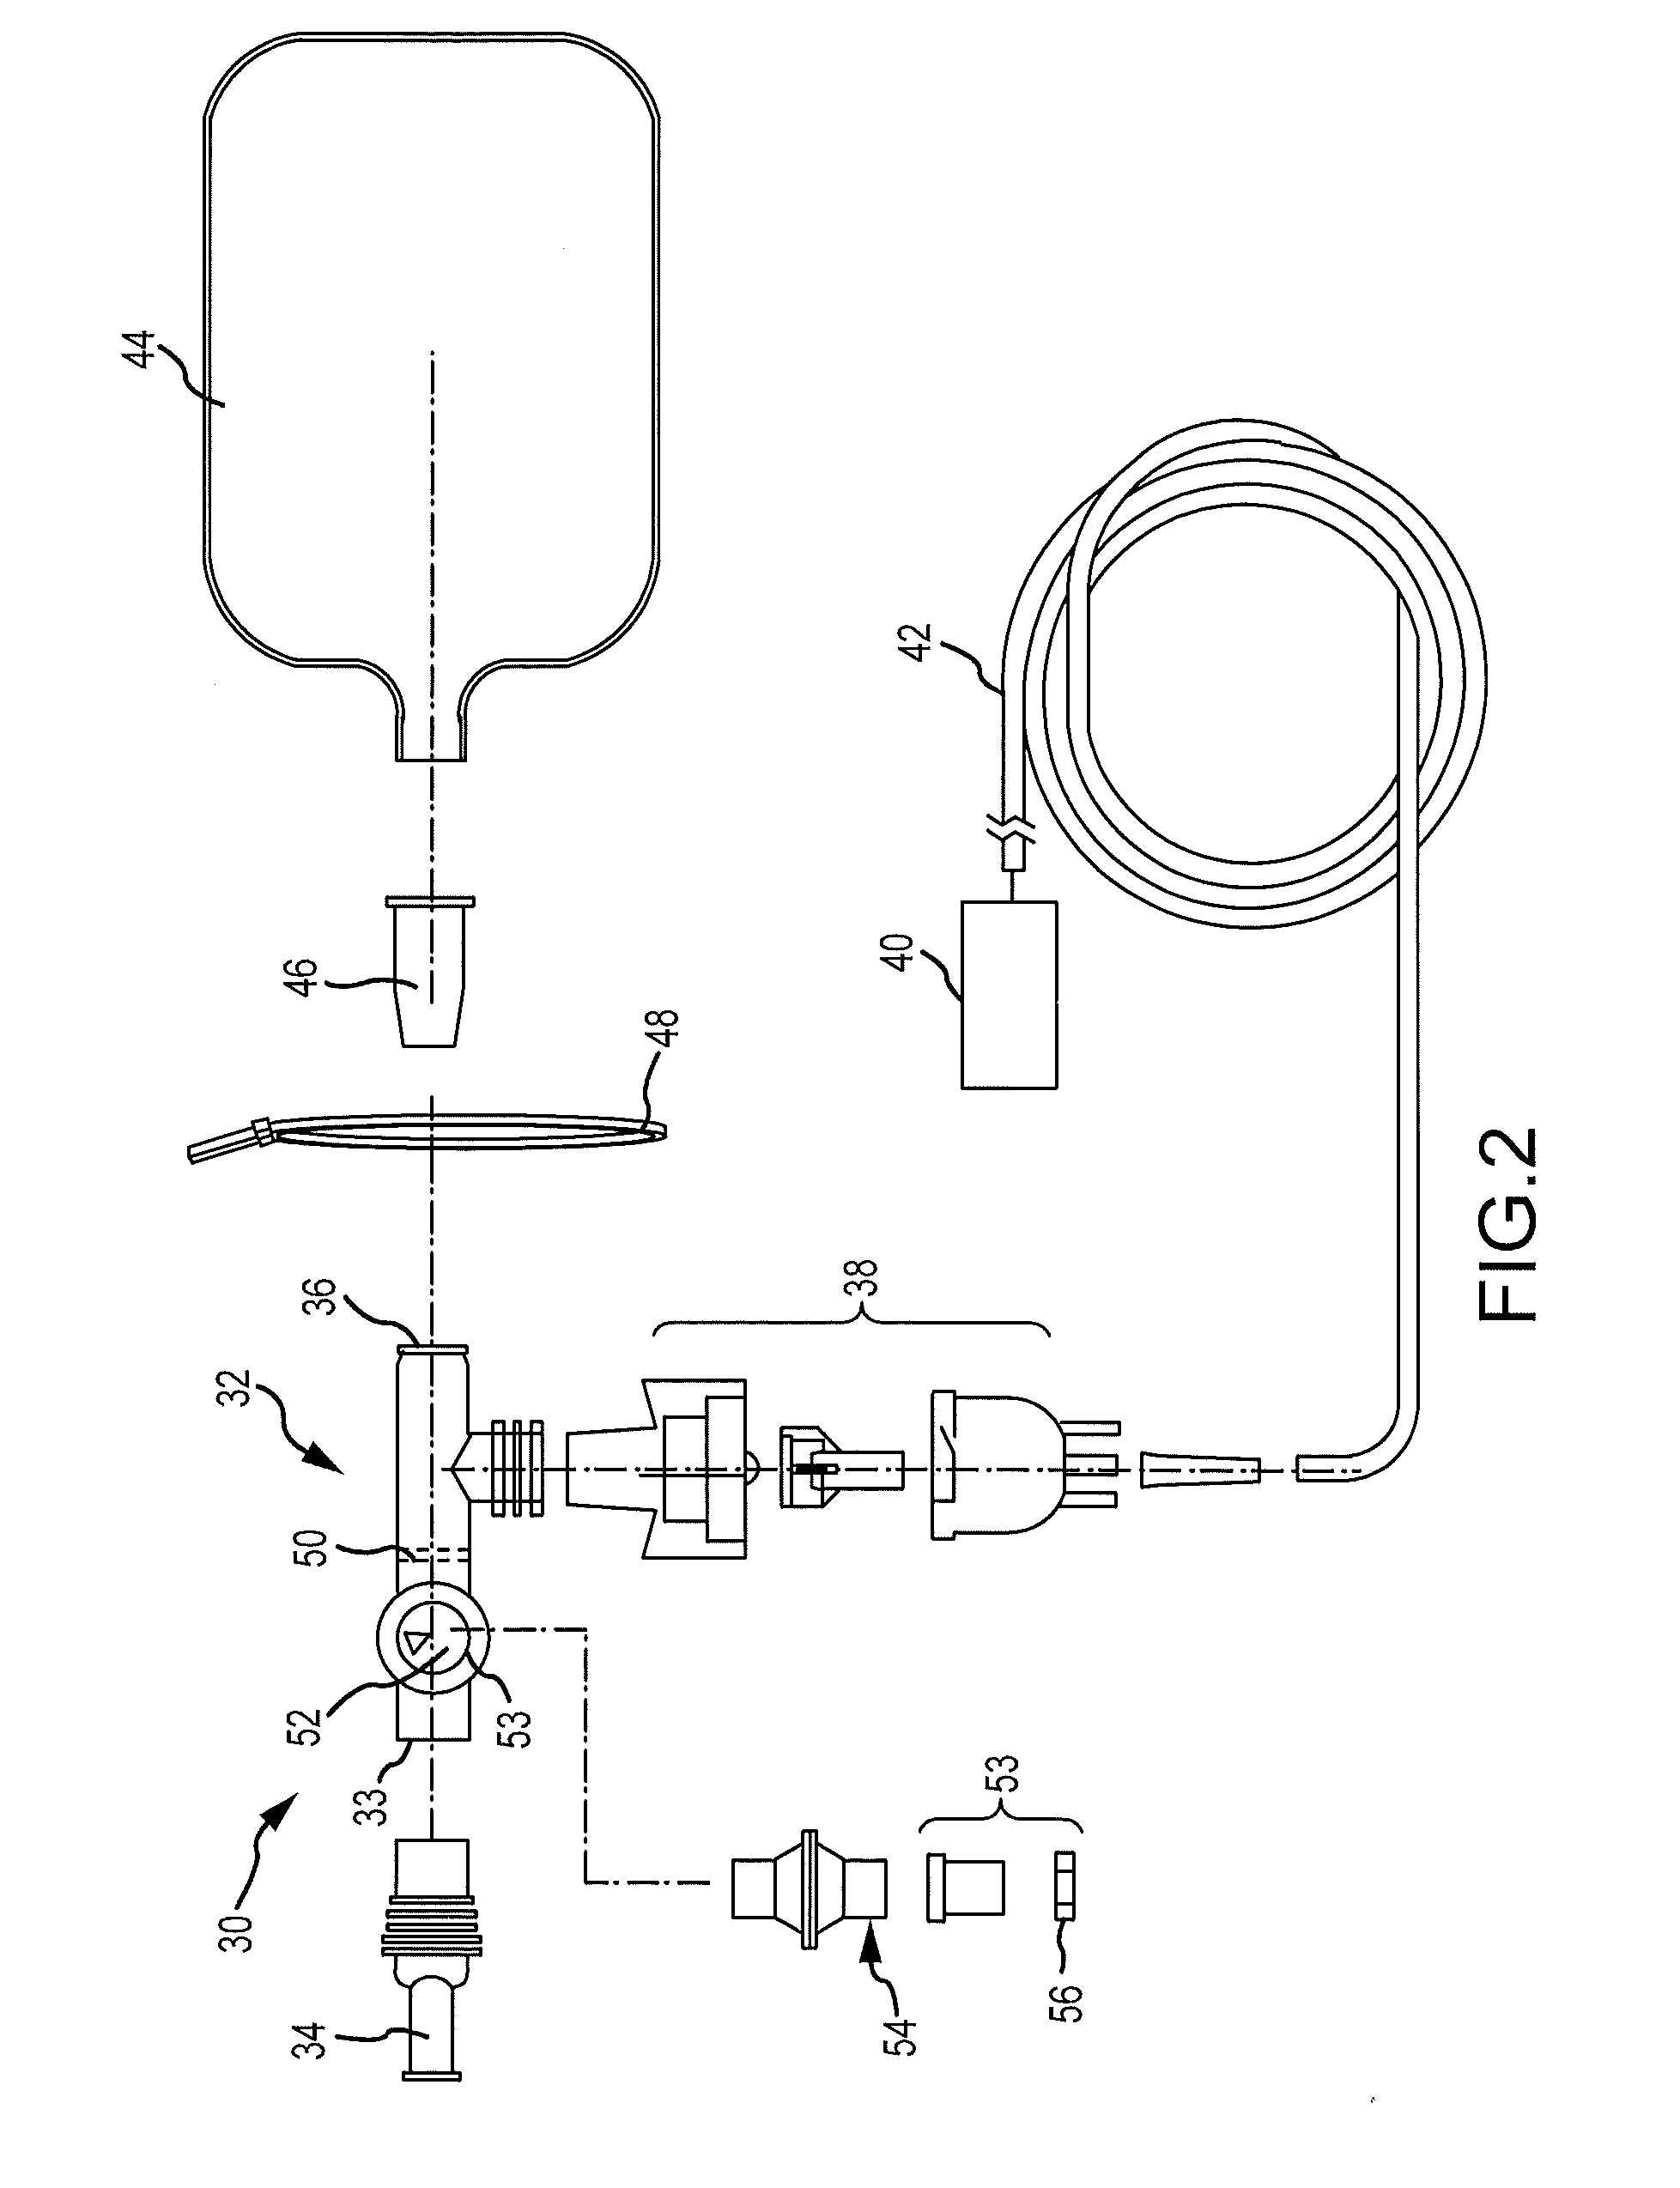 Reservoir system for gas delivery to a patient